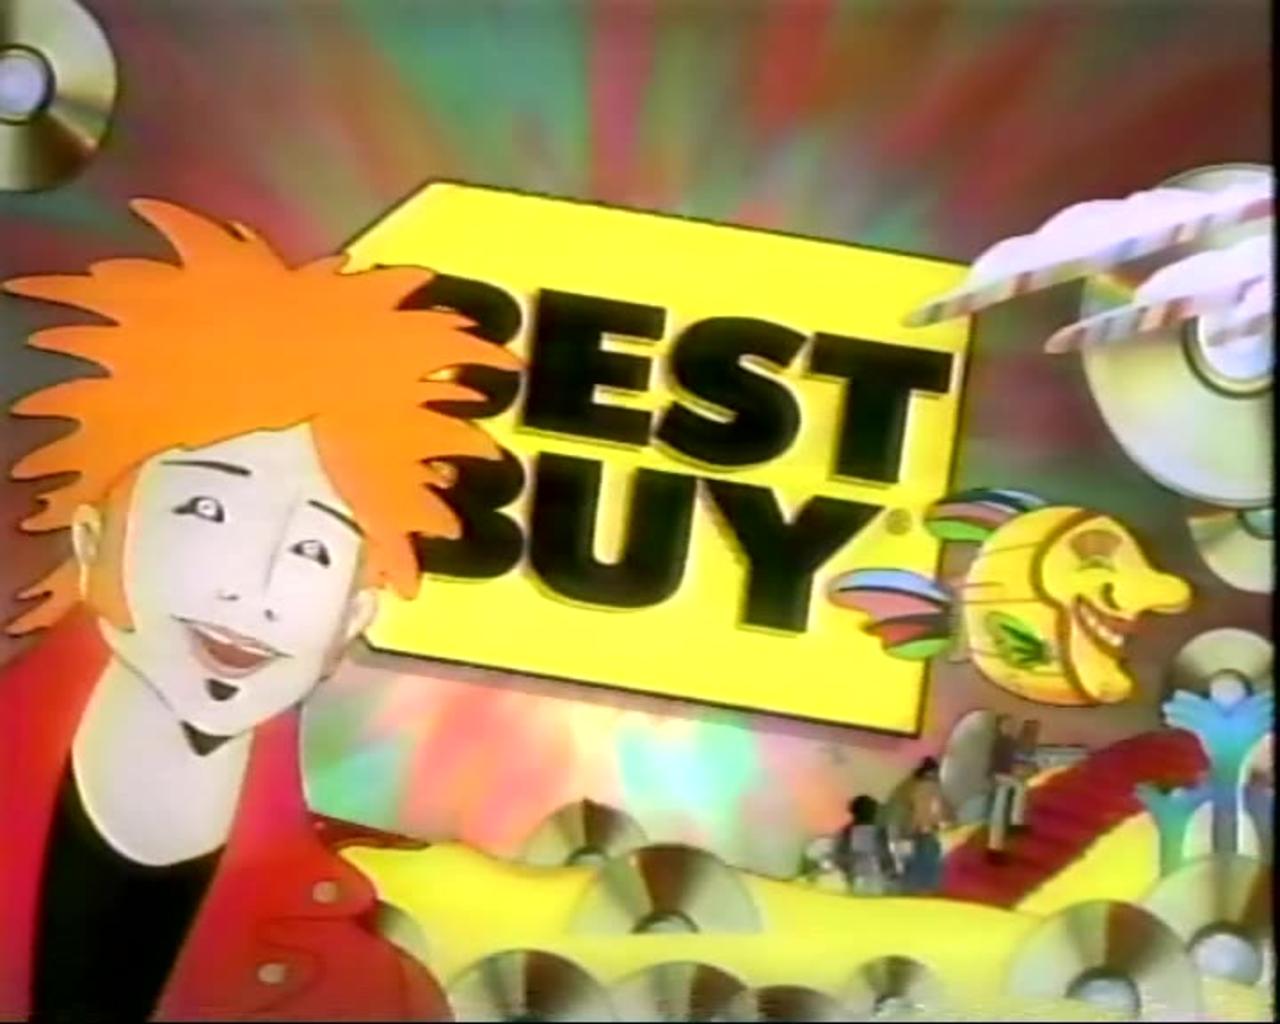 April 1994 - Animated Beatles Find Compact Disc Bargains at Best Buy